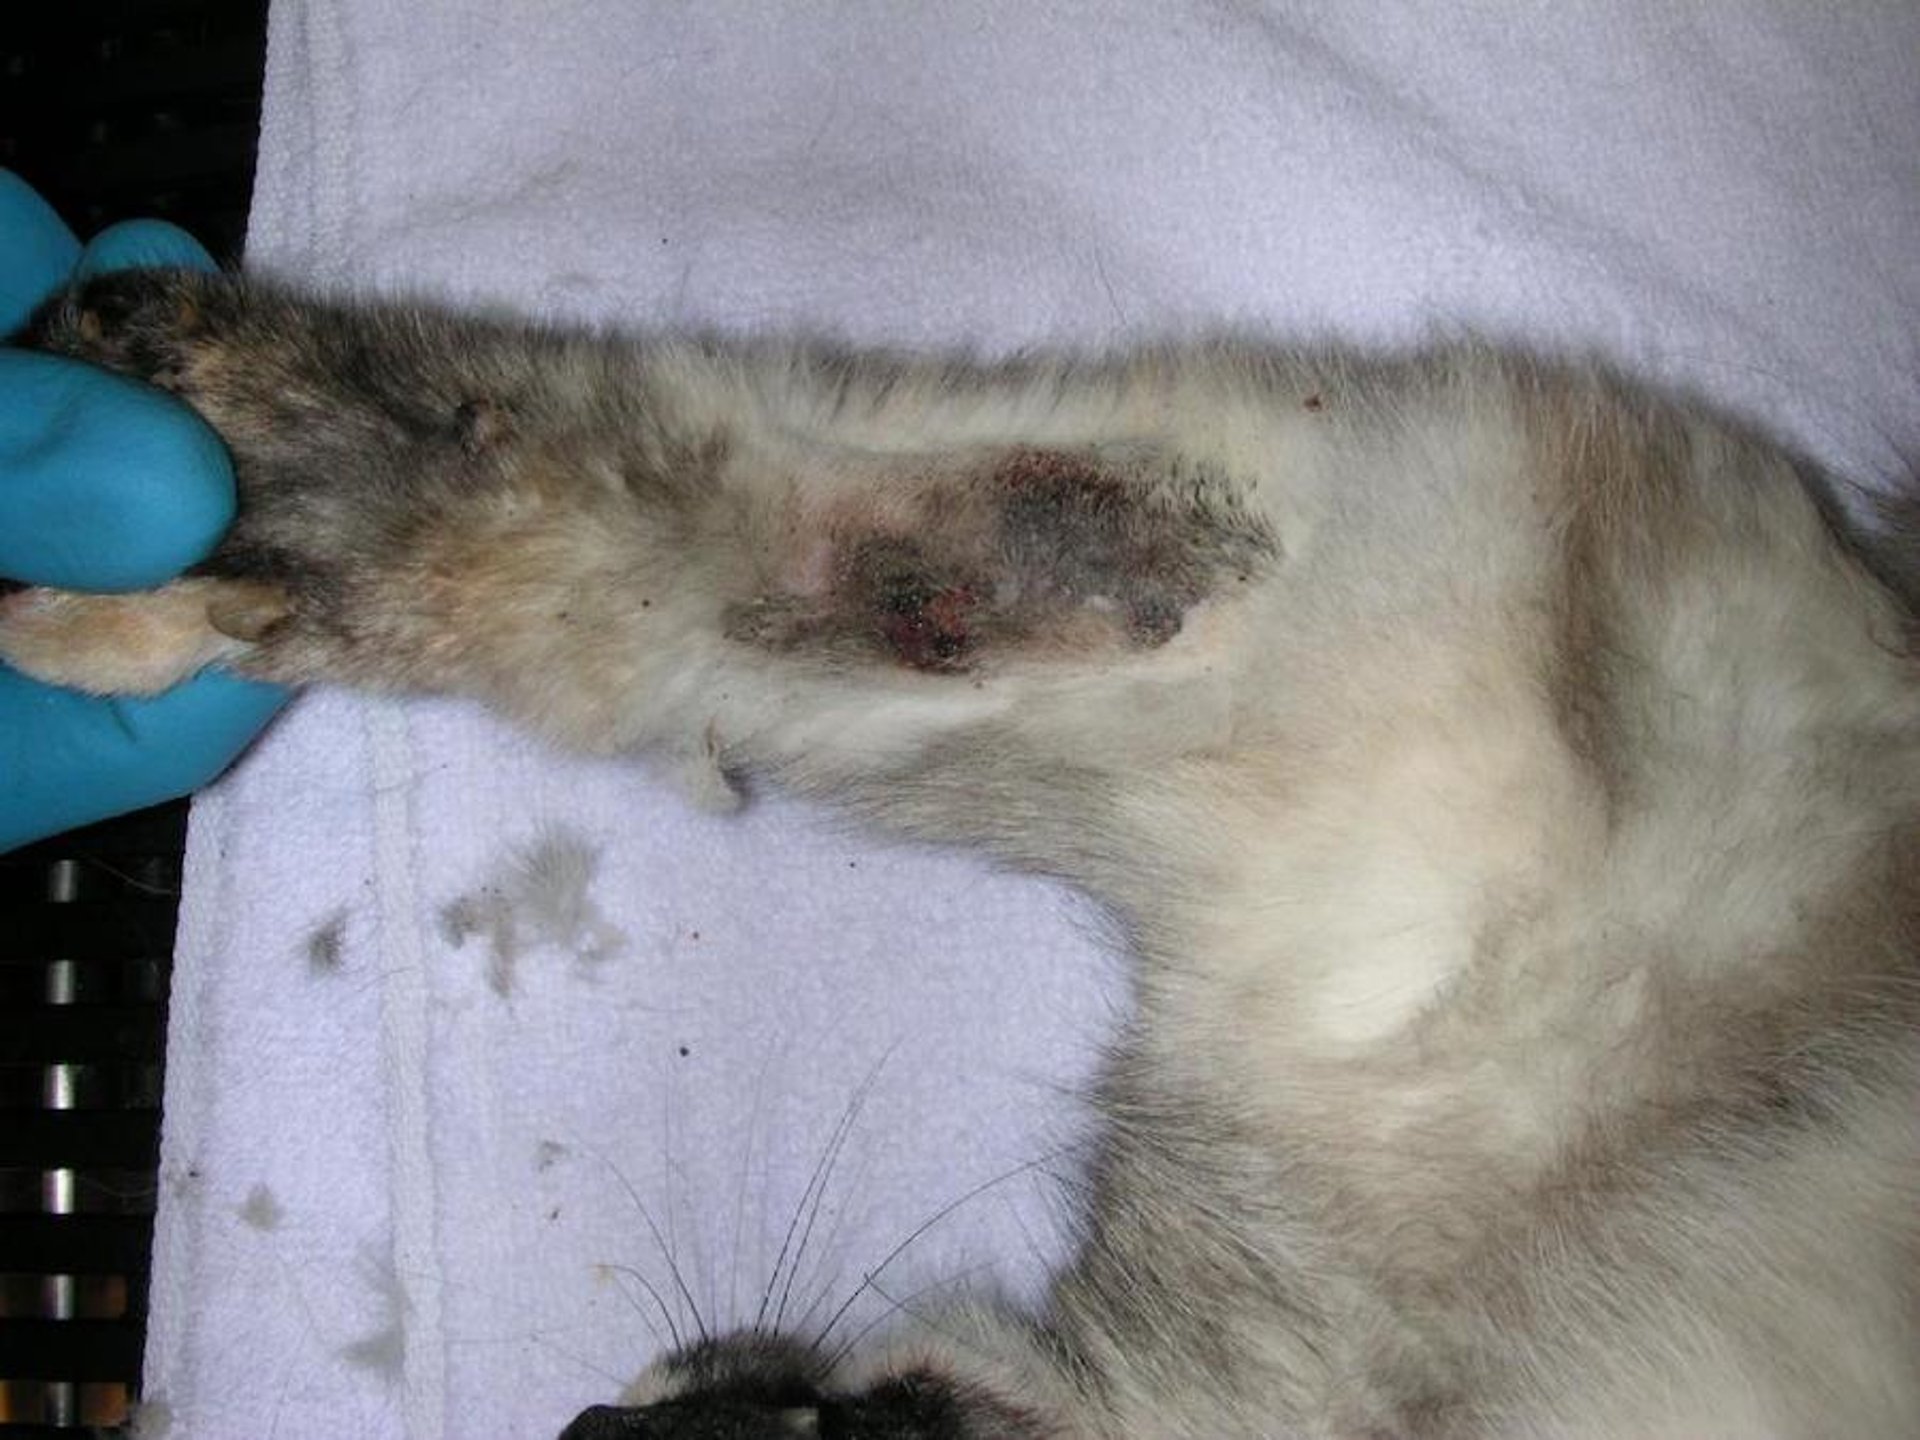 Multicentric squamous cell carcinoma in situ (feline Bowen disease), 19-year-old cat